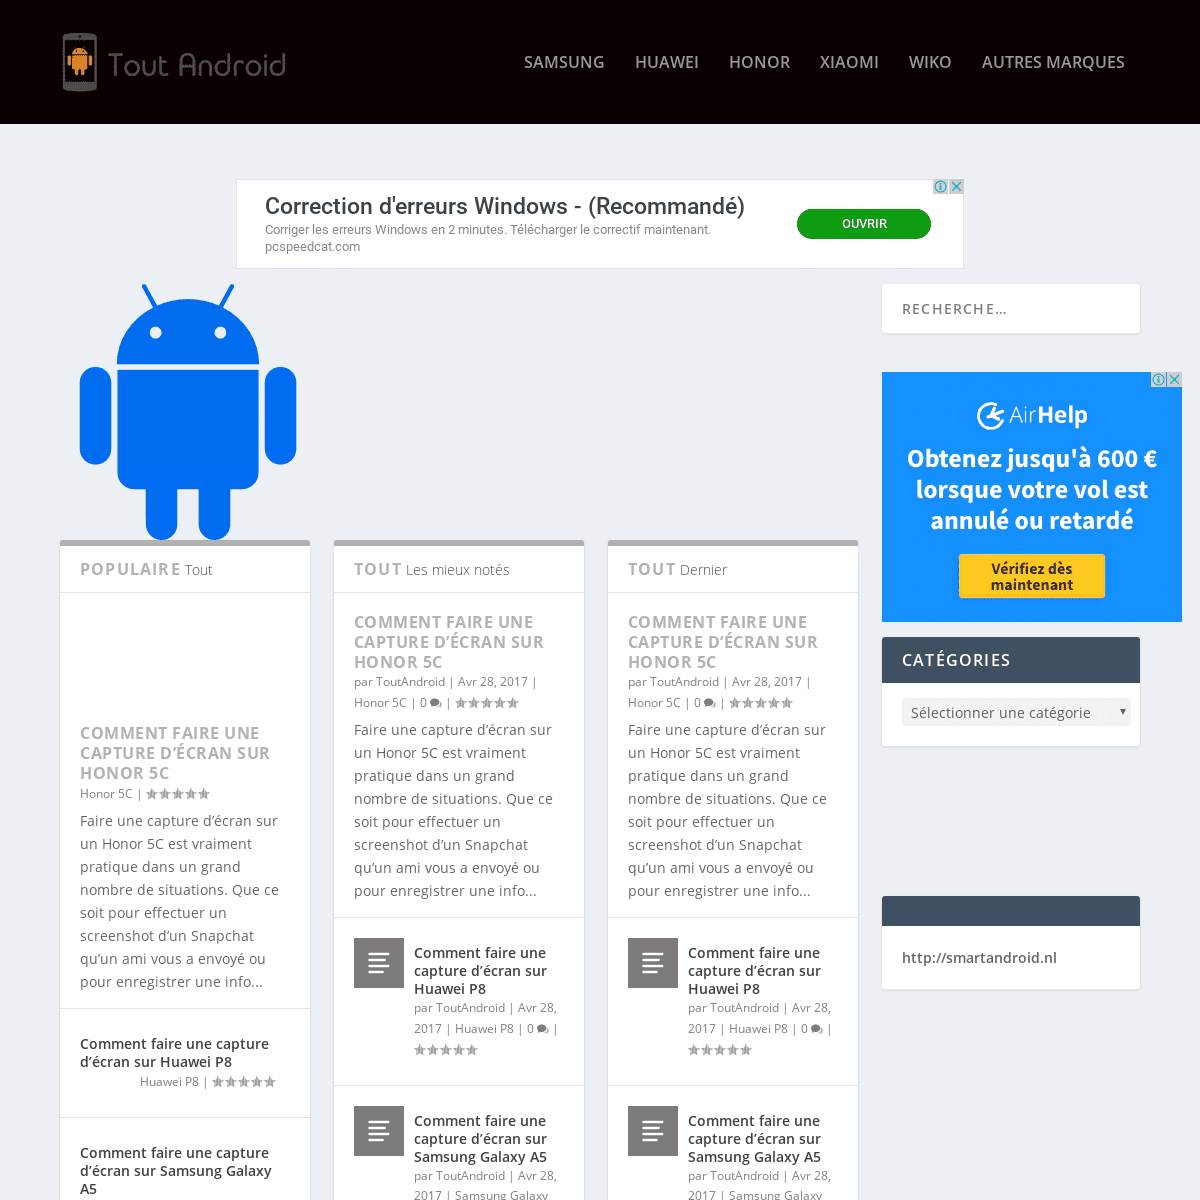 A complete backup of toutandroid.fr